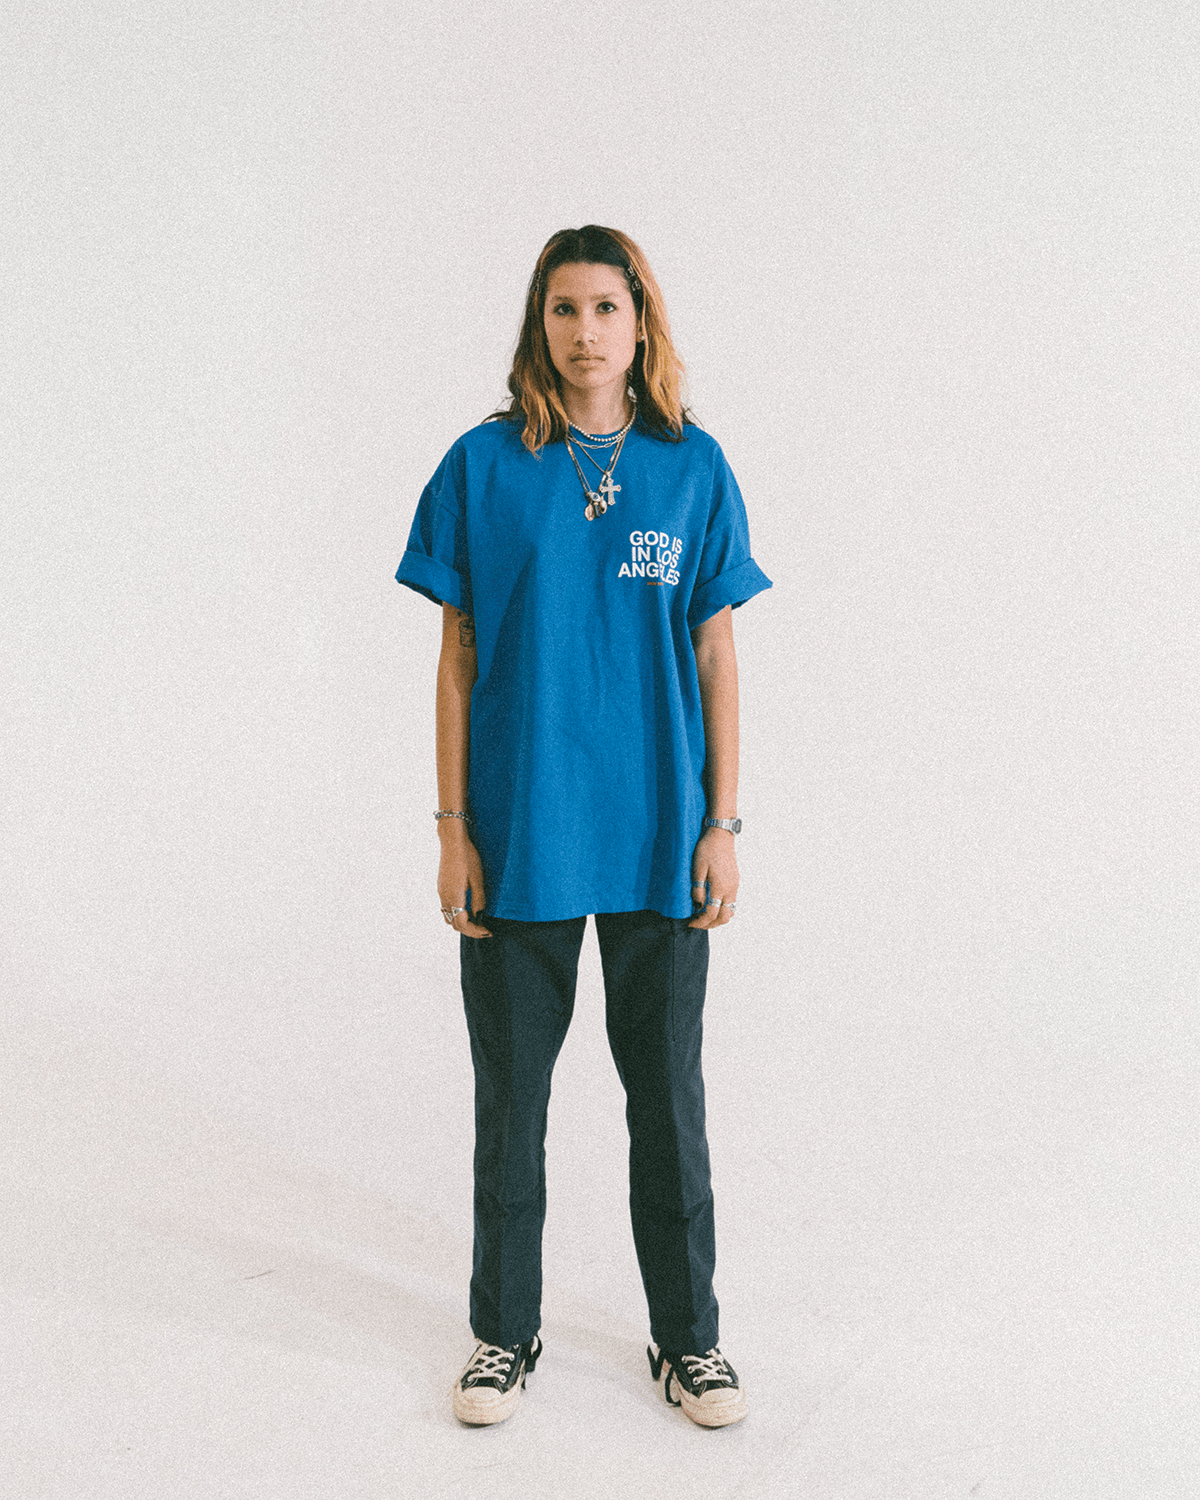 The God Is In Los Angeles Shirt is a premium garment dyed, ethically sourced and made in the USA T-shirt made by NHIM Apparel Christian clothing brand.